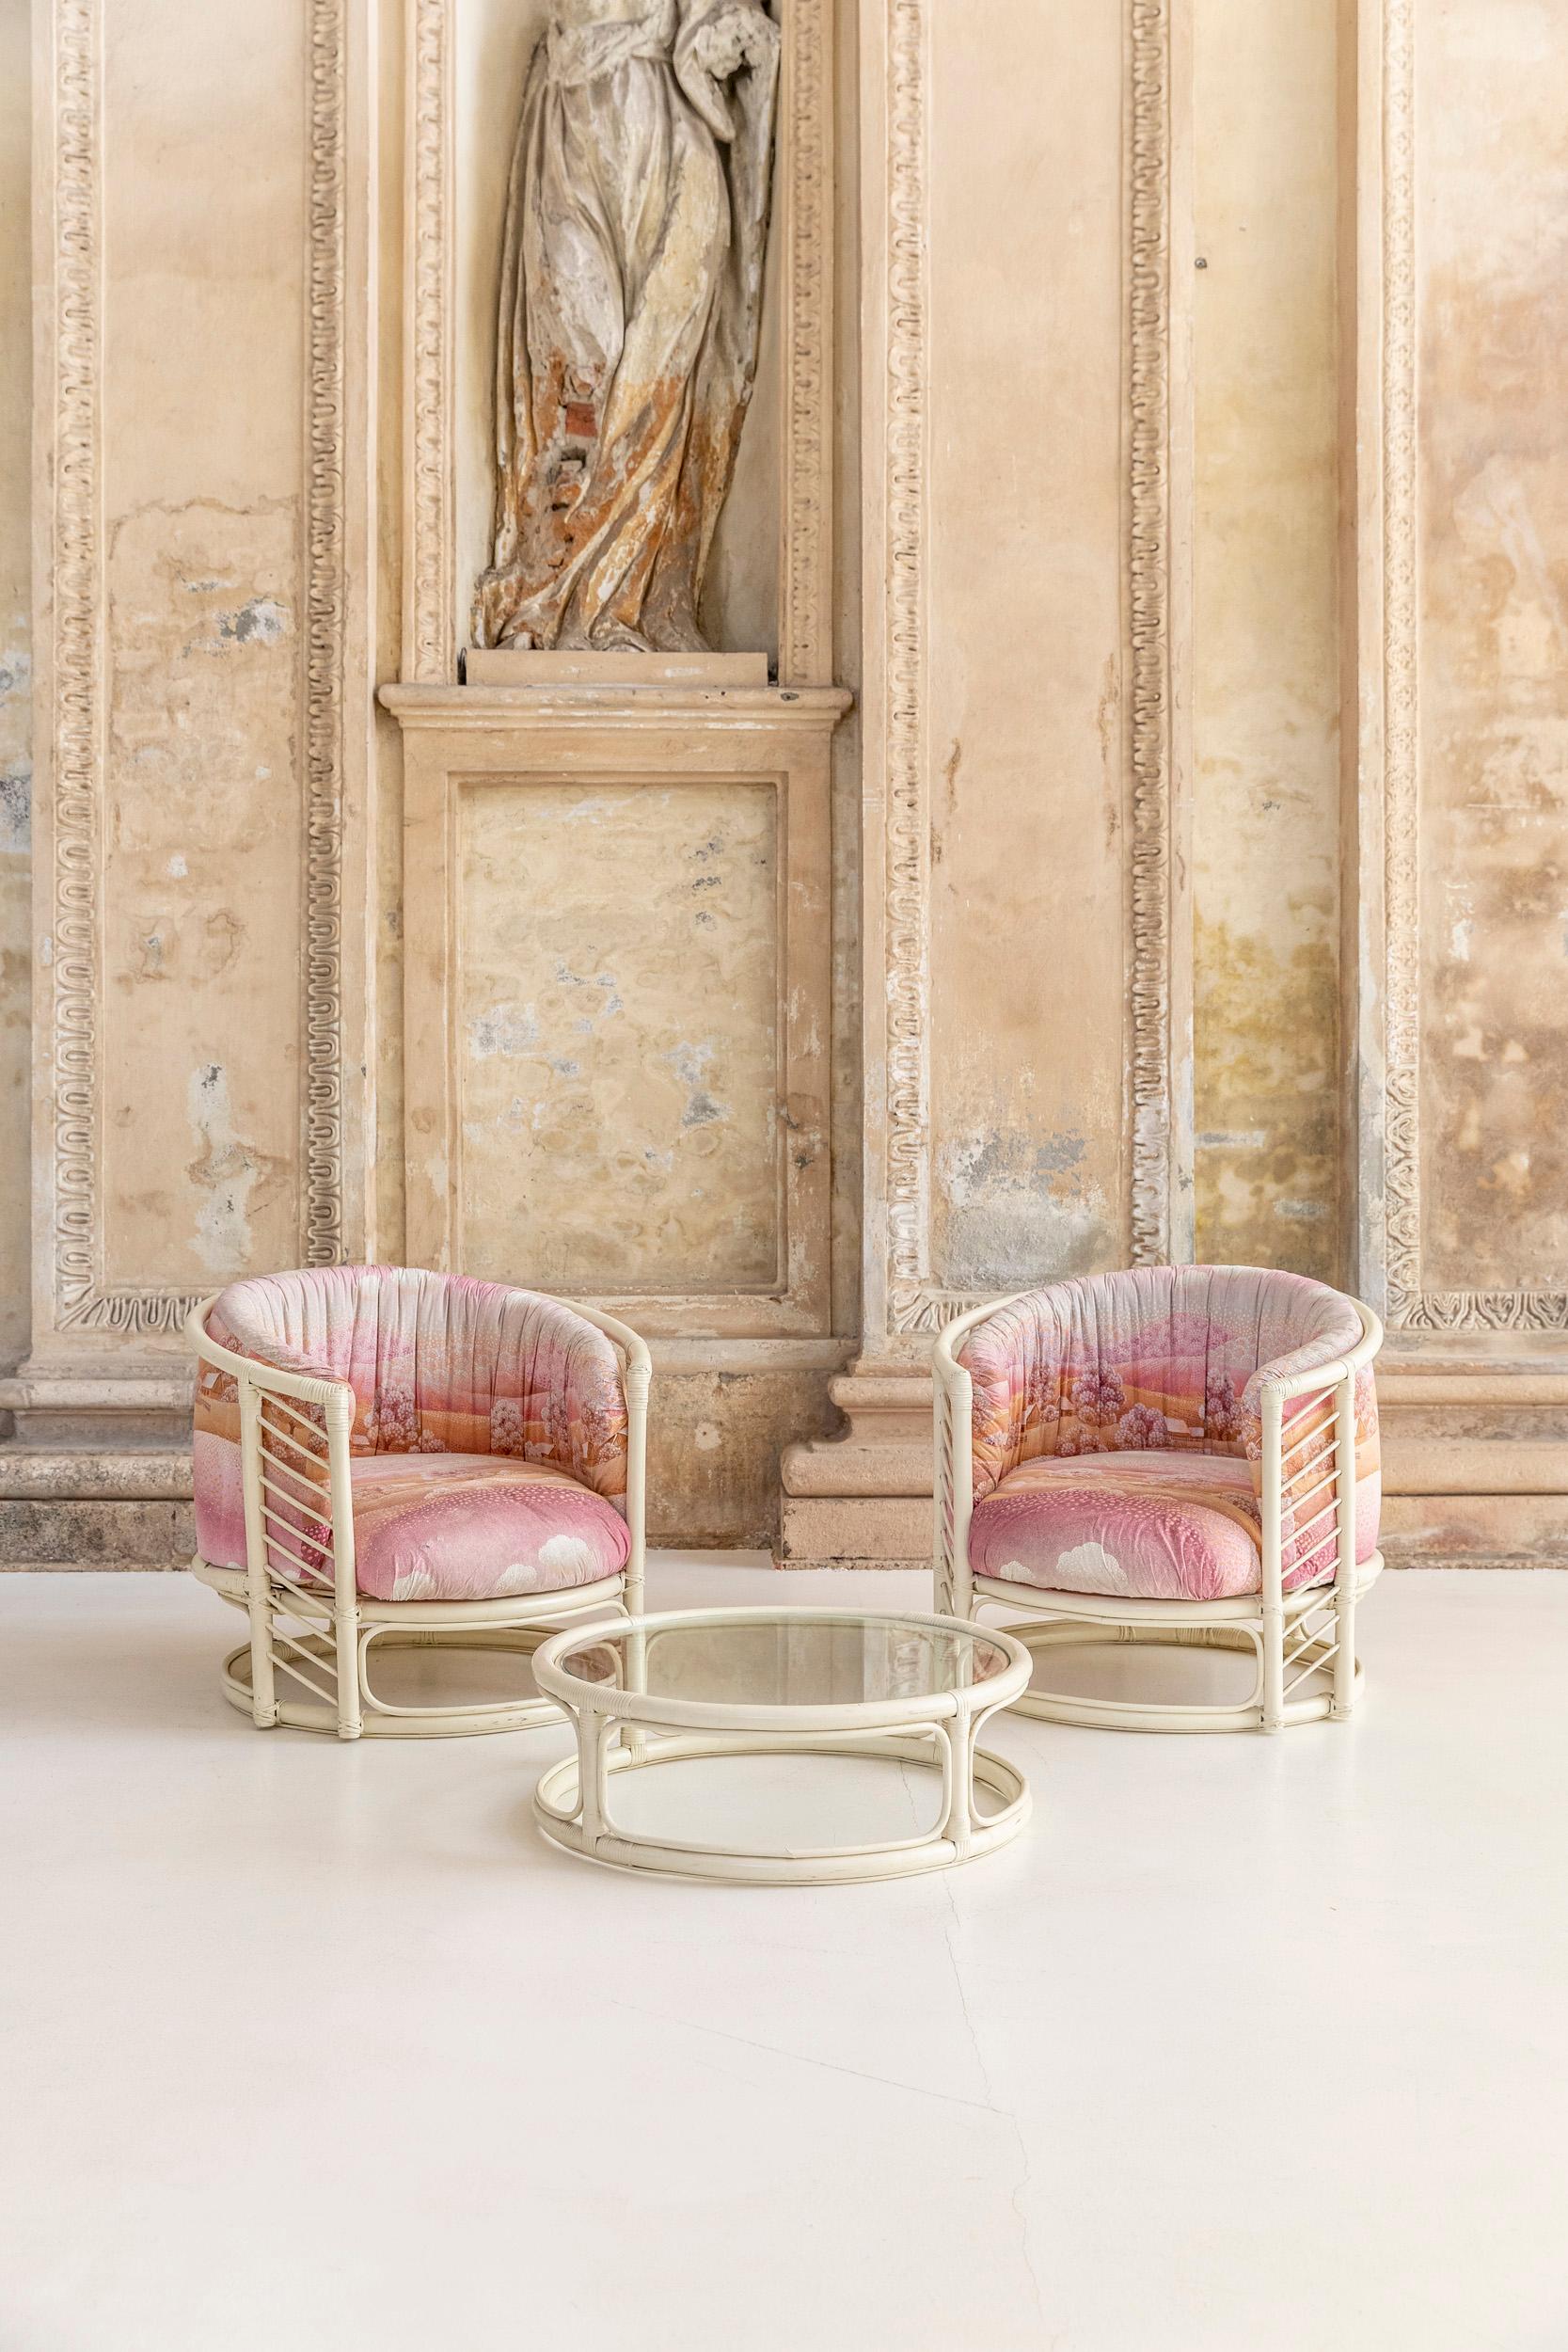 Italian white bamboo set composed by two round armchairs and a round shape coffe table with clear glass top. The armchairs have peculiar cushions in original fabric naif motif in pink and orange tones. 
Italy, 1970 circa.

Armchair measures: